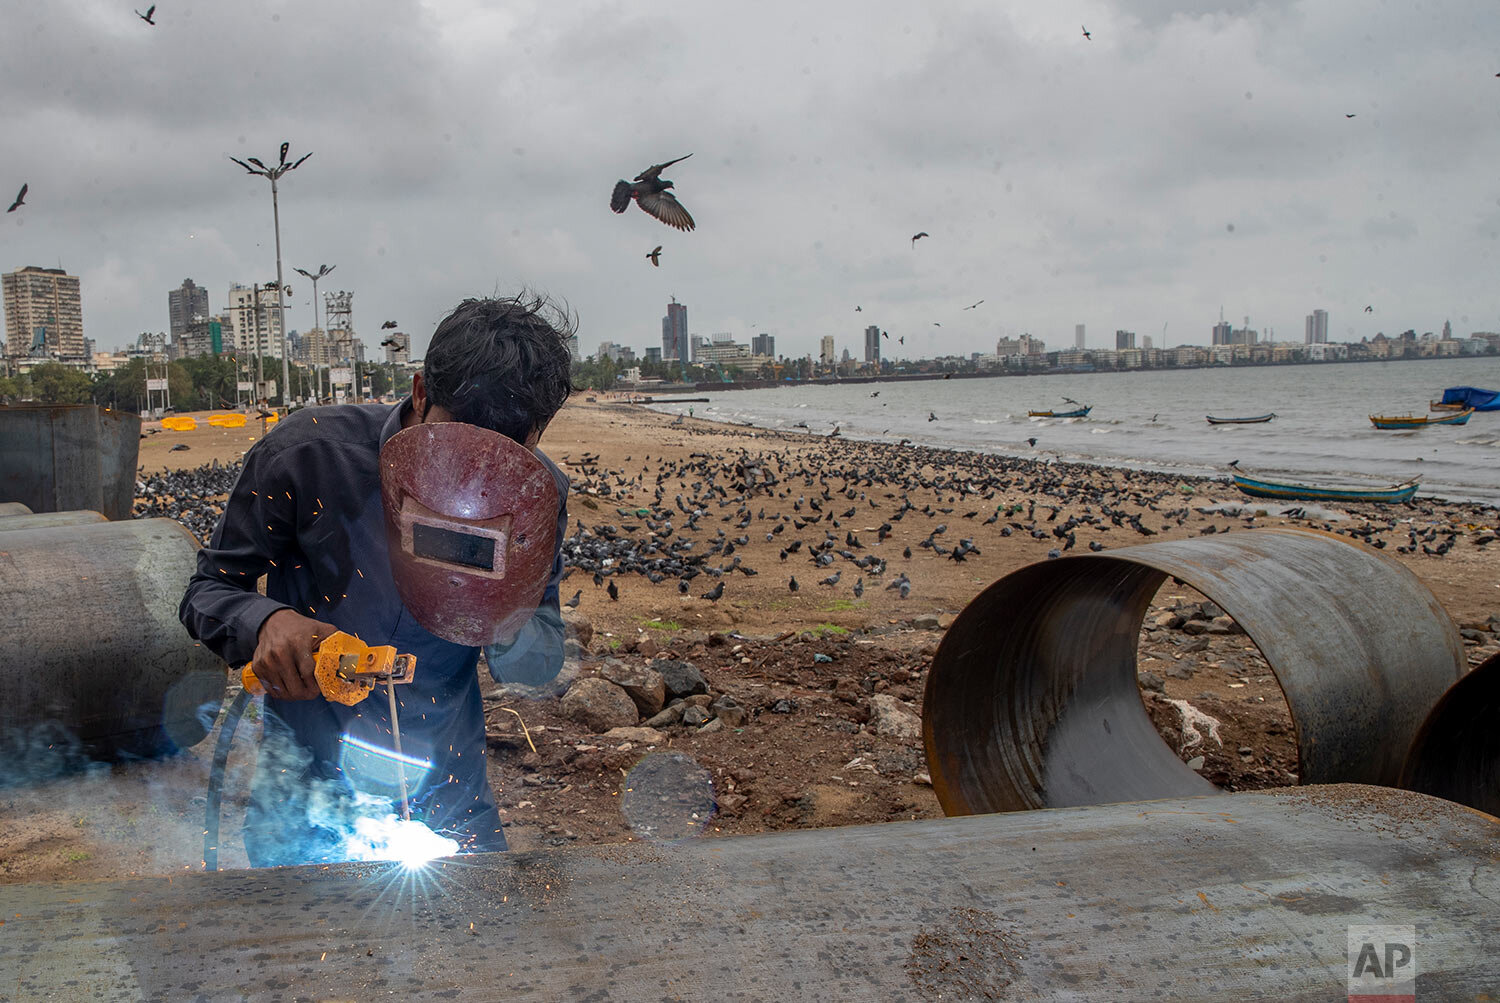  A worker welds an iron pole at a construction site by the Arabian sea shore in Mumbai, India, Tuesday, Sept. 28, 2021. (AP Photo/Rafiq Maqbool) 